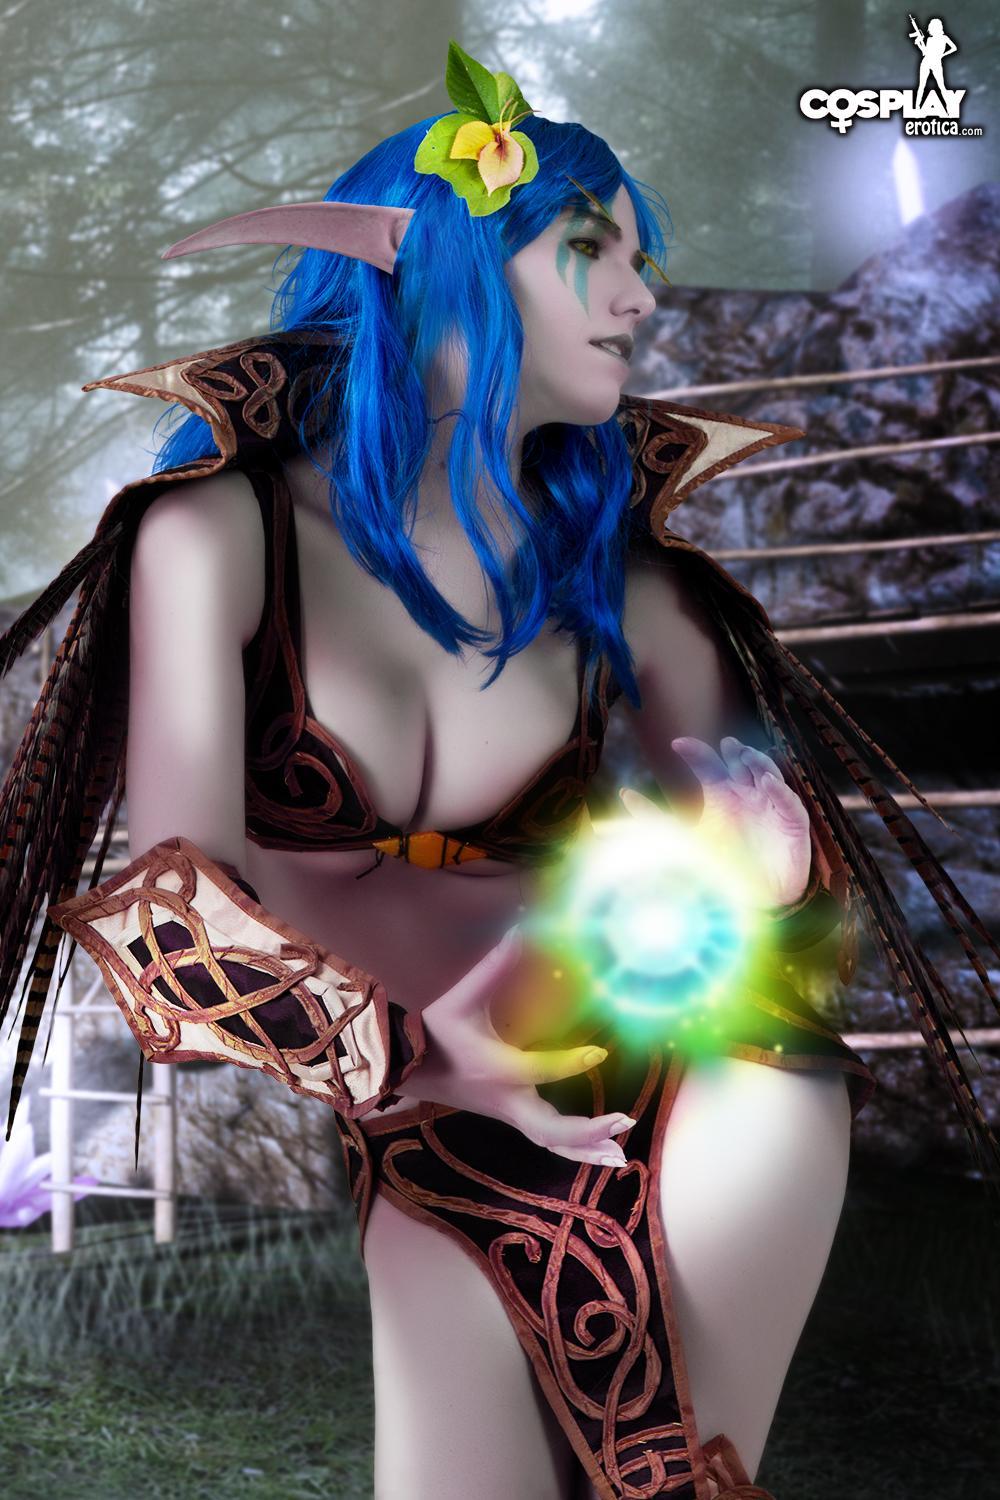 Cosplay hottie Cassie invites you on her Crystal Quest #53702677